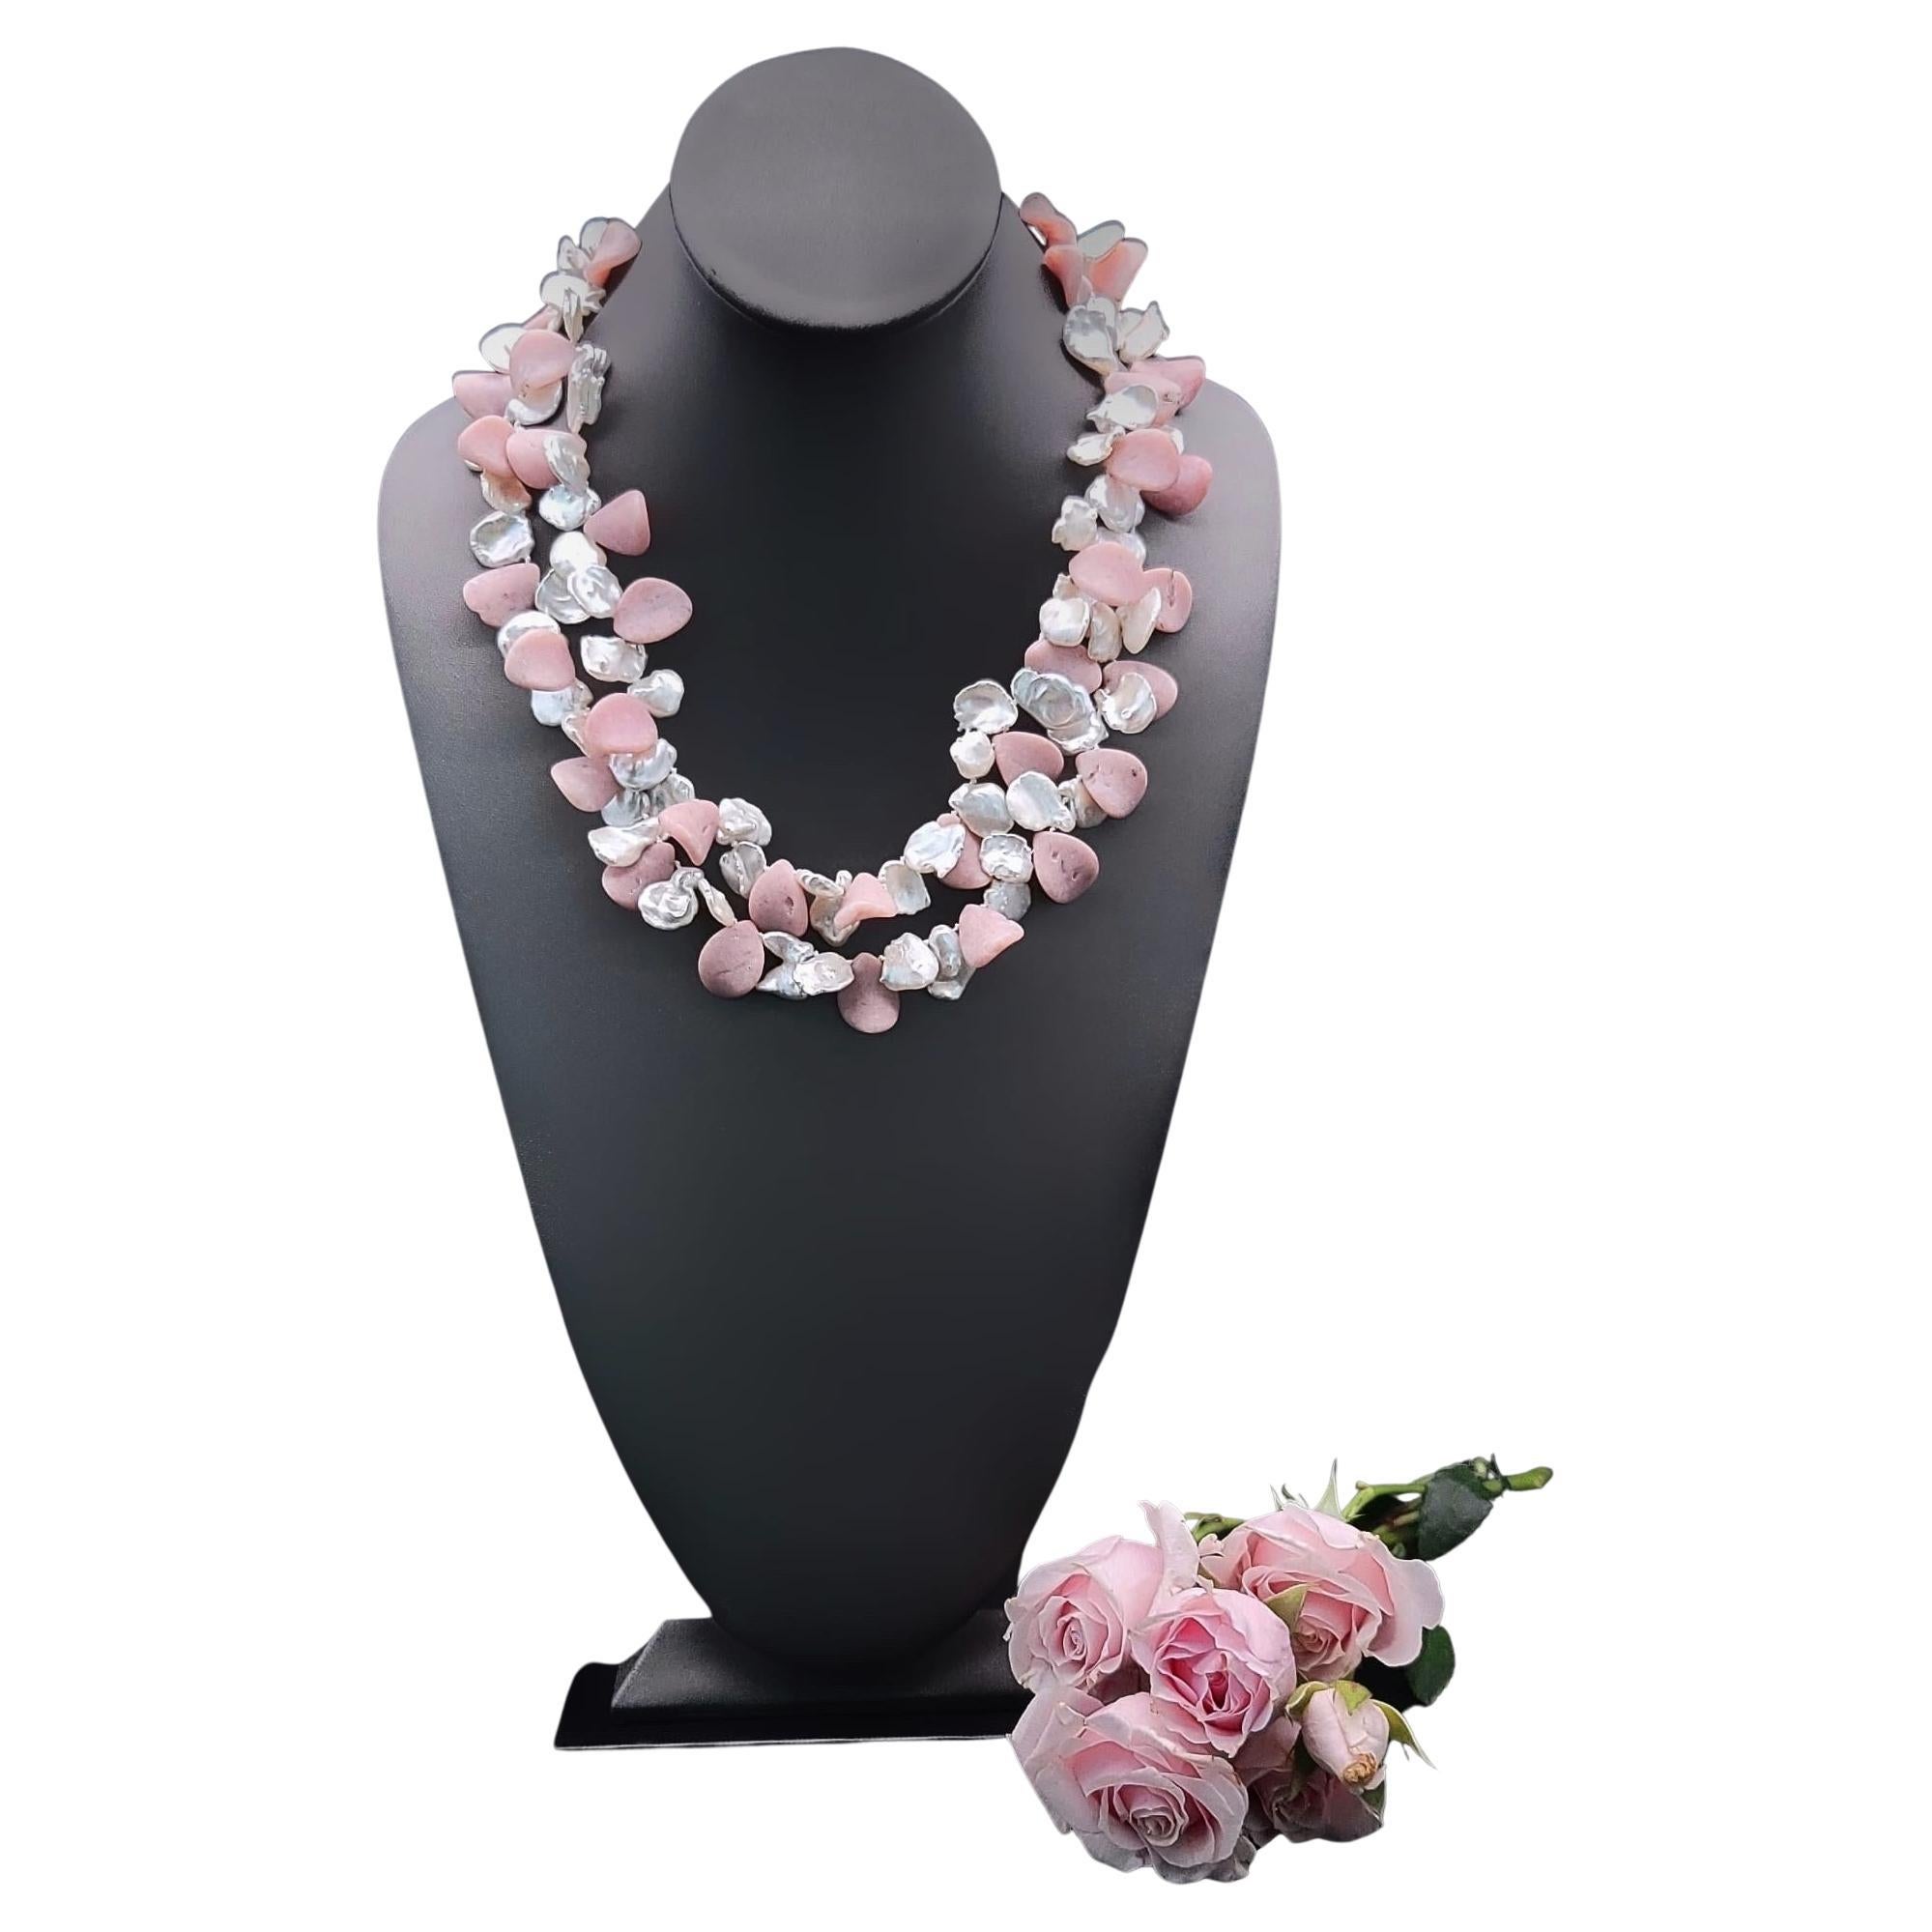 One-of-a-Kind
 
Both the Opals and pearls are petal-shaped forming a very feminine pink and white ruffle. The clasp is a polished Morganite stone set in Sterling silver. Which is very attractive worn on the side.
Silk hand-knotted
Approx: 20 inch
